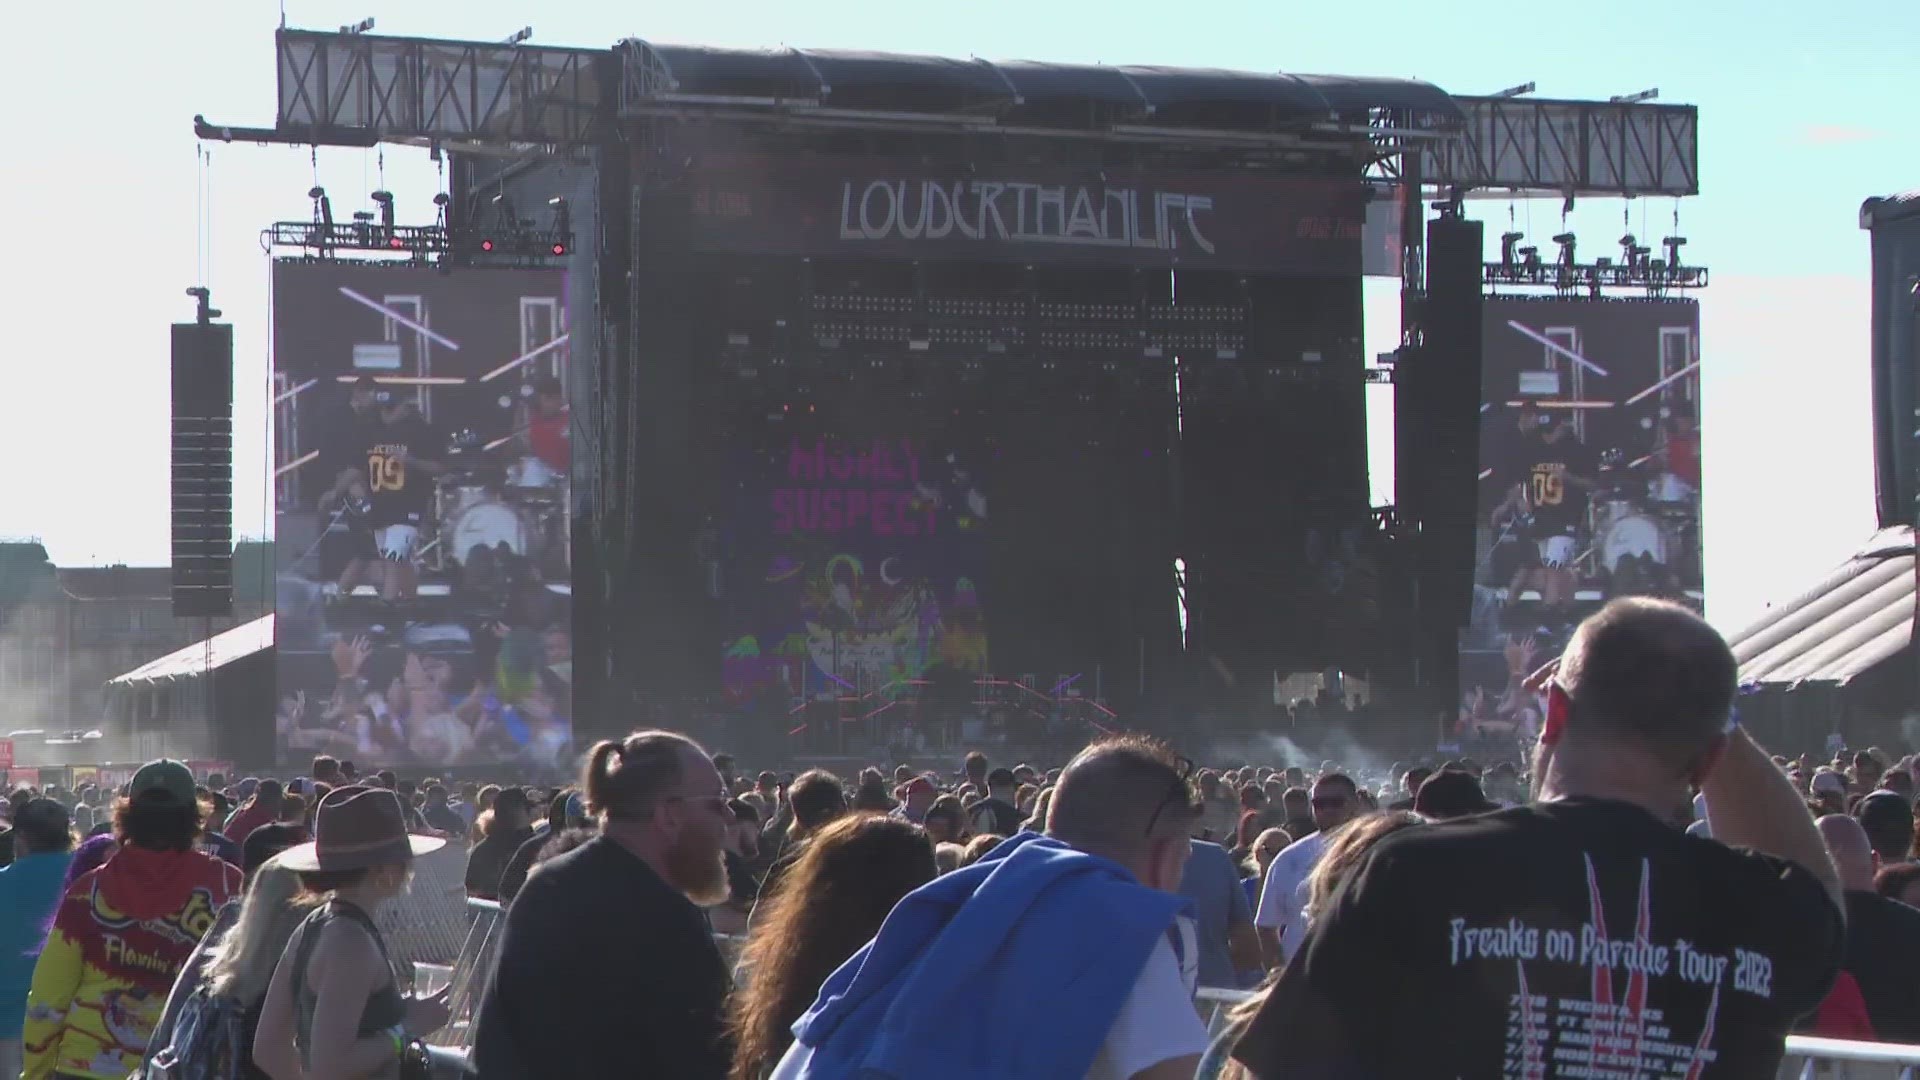 Louder Than Life, the hard rock and metal music festival in Louisville, begins on Sept 21 with performances from Foo Fighters, Coheed, Cambria and Weezer.